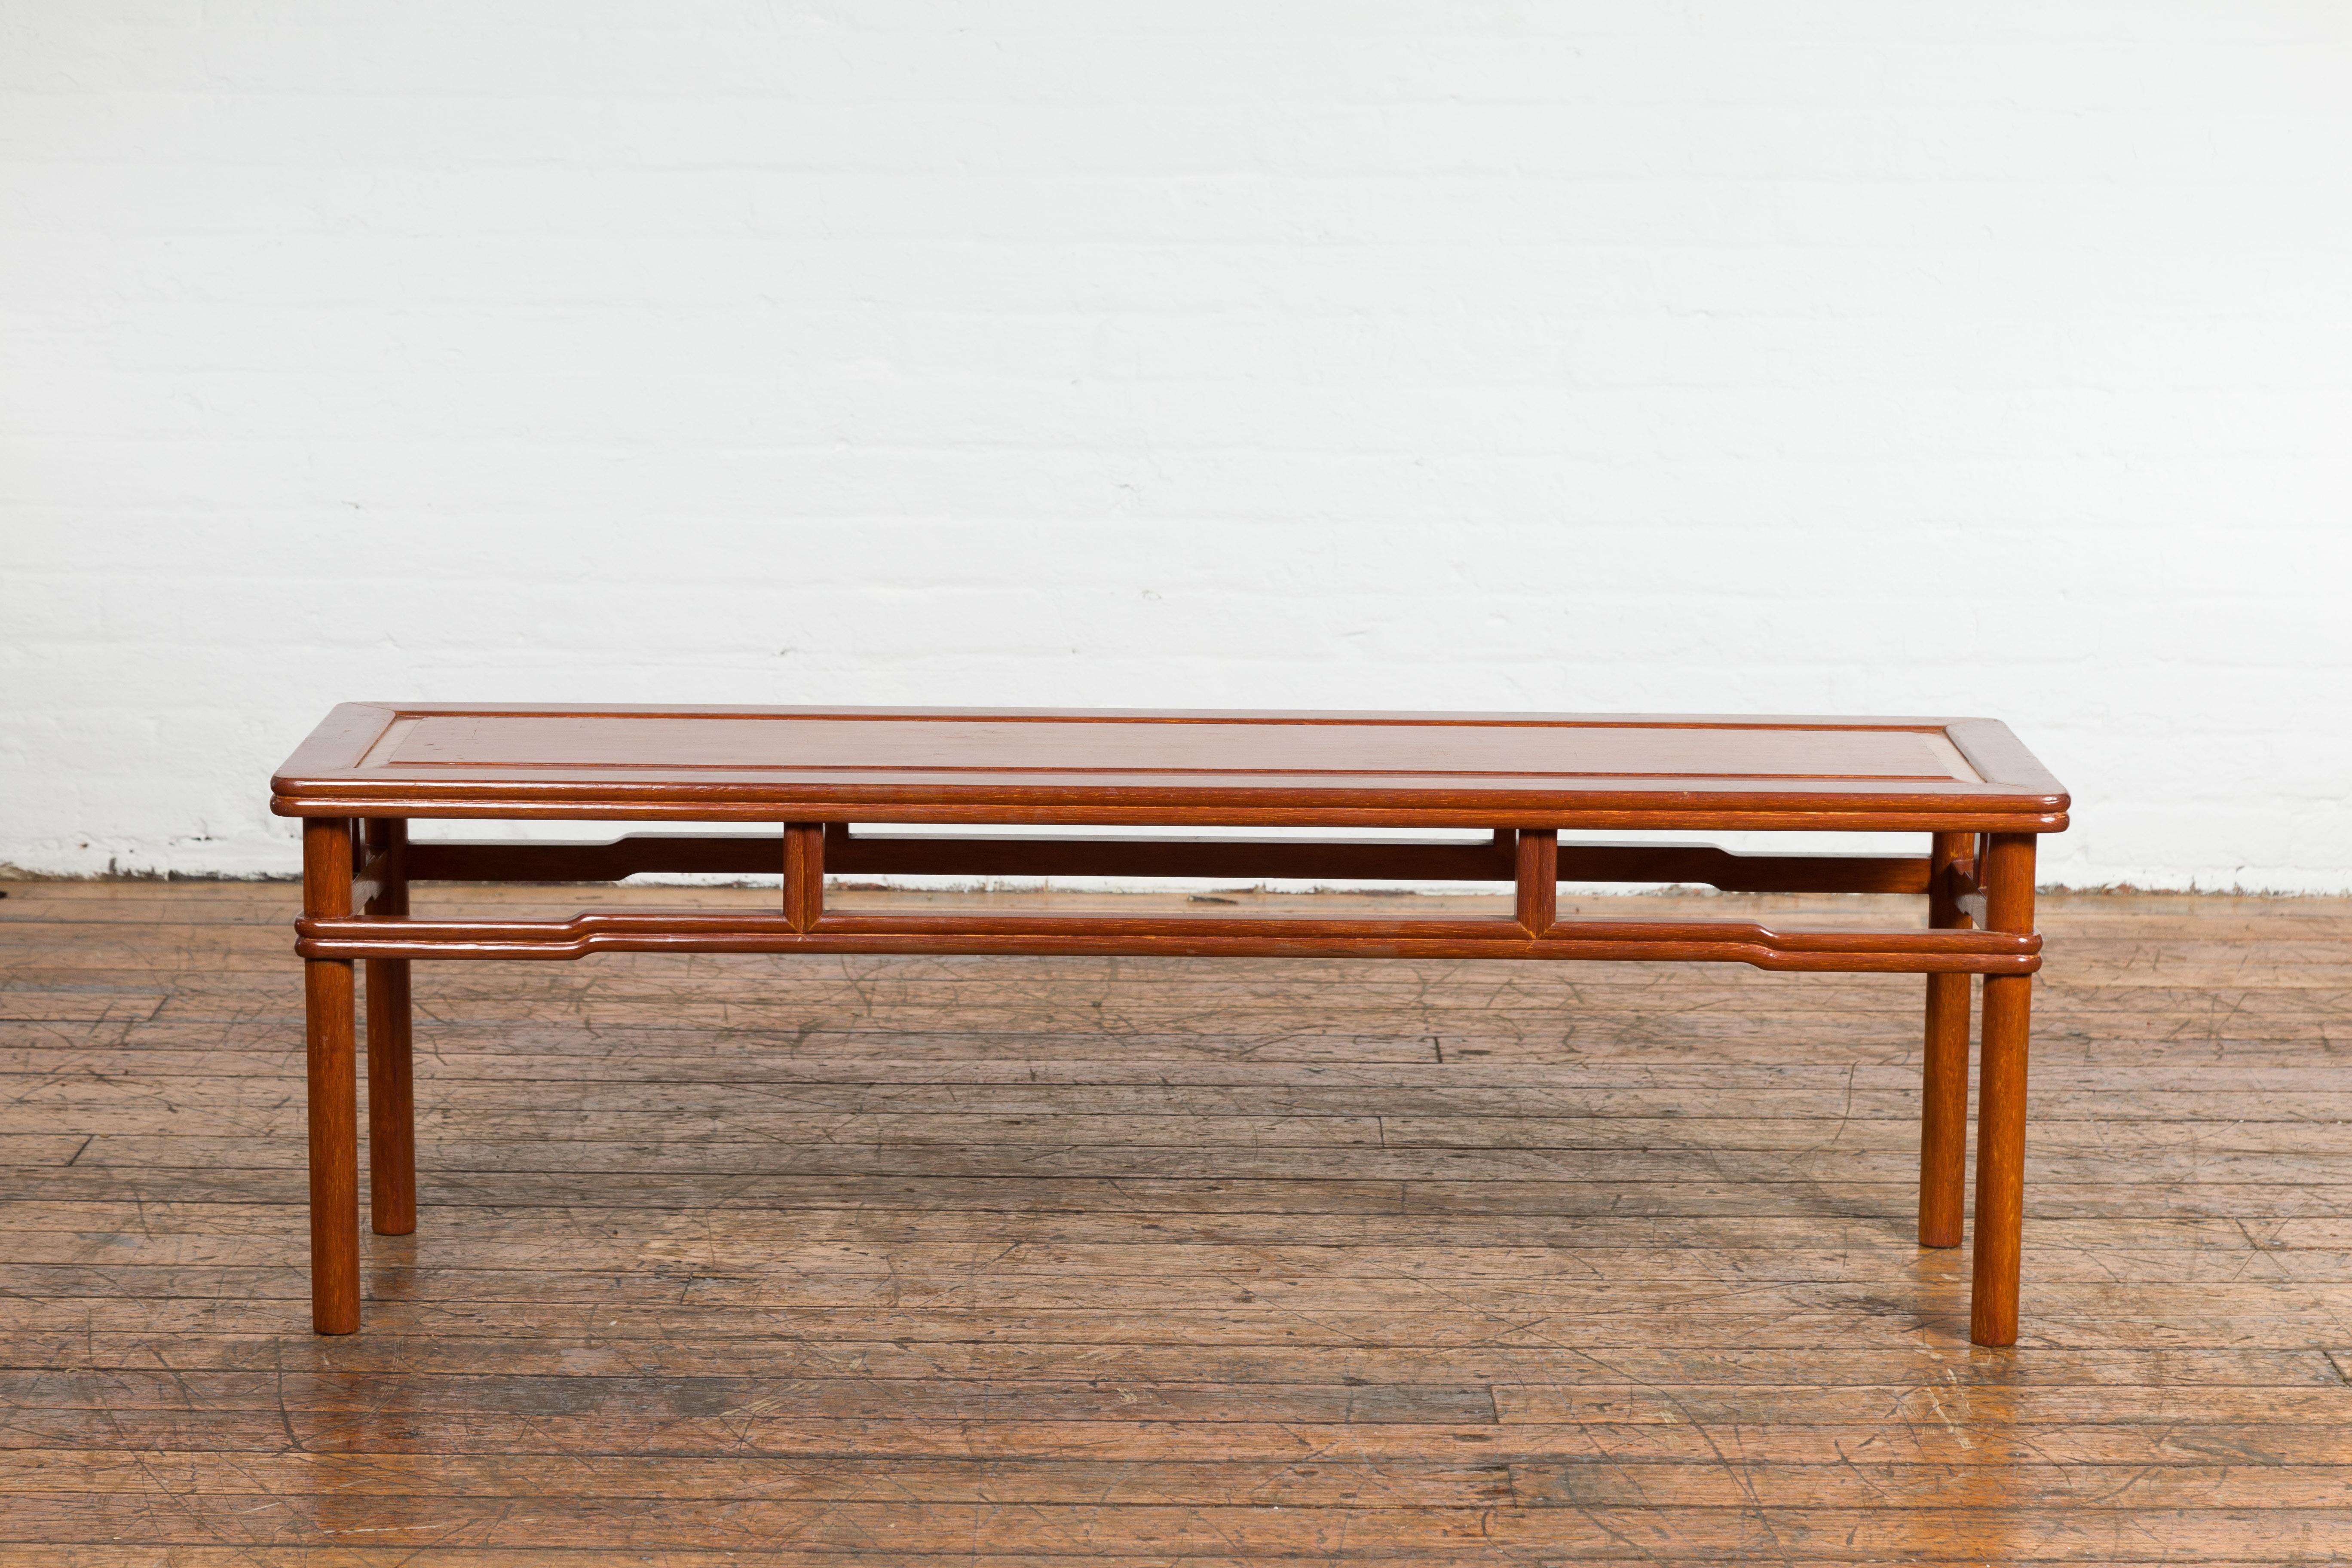 20th Century Chinese Late Qing Dynasty 1900s Low Kang Coffee Table with Humpback Stretchers For Sale